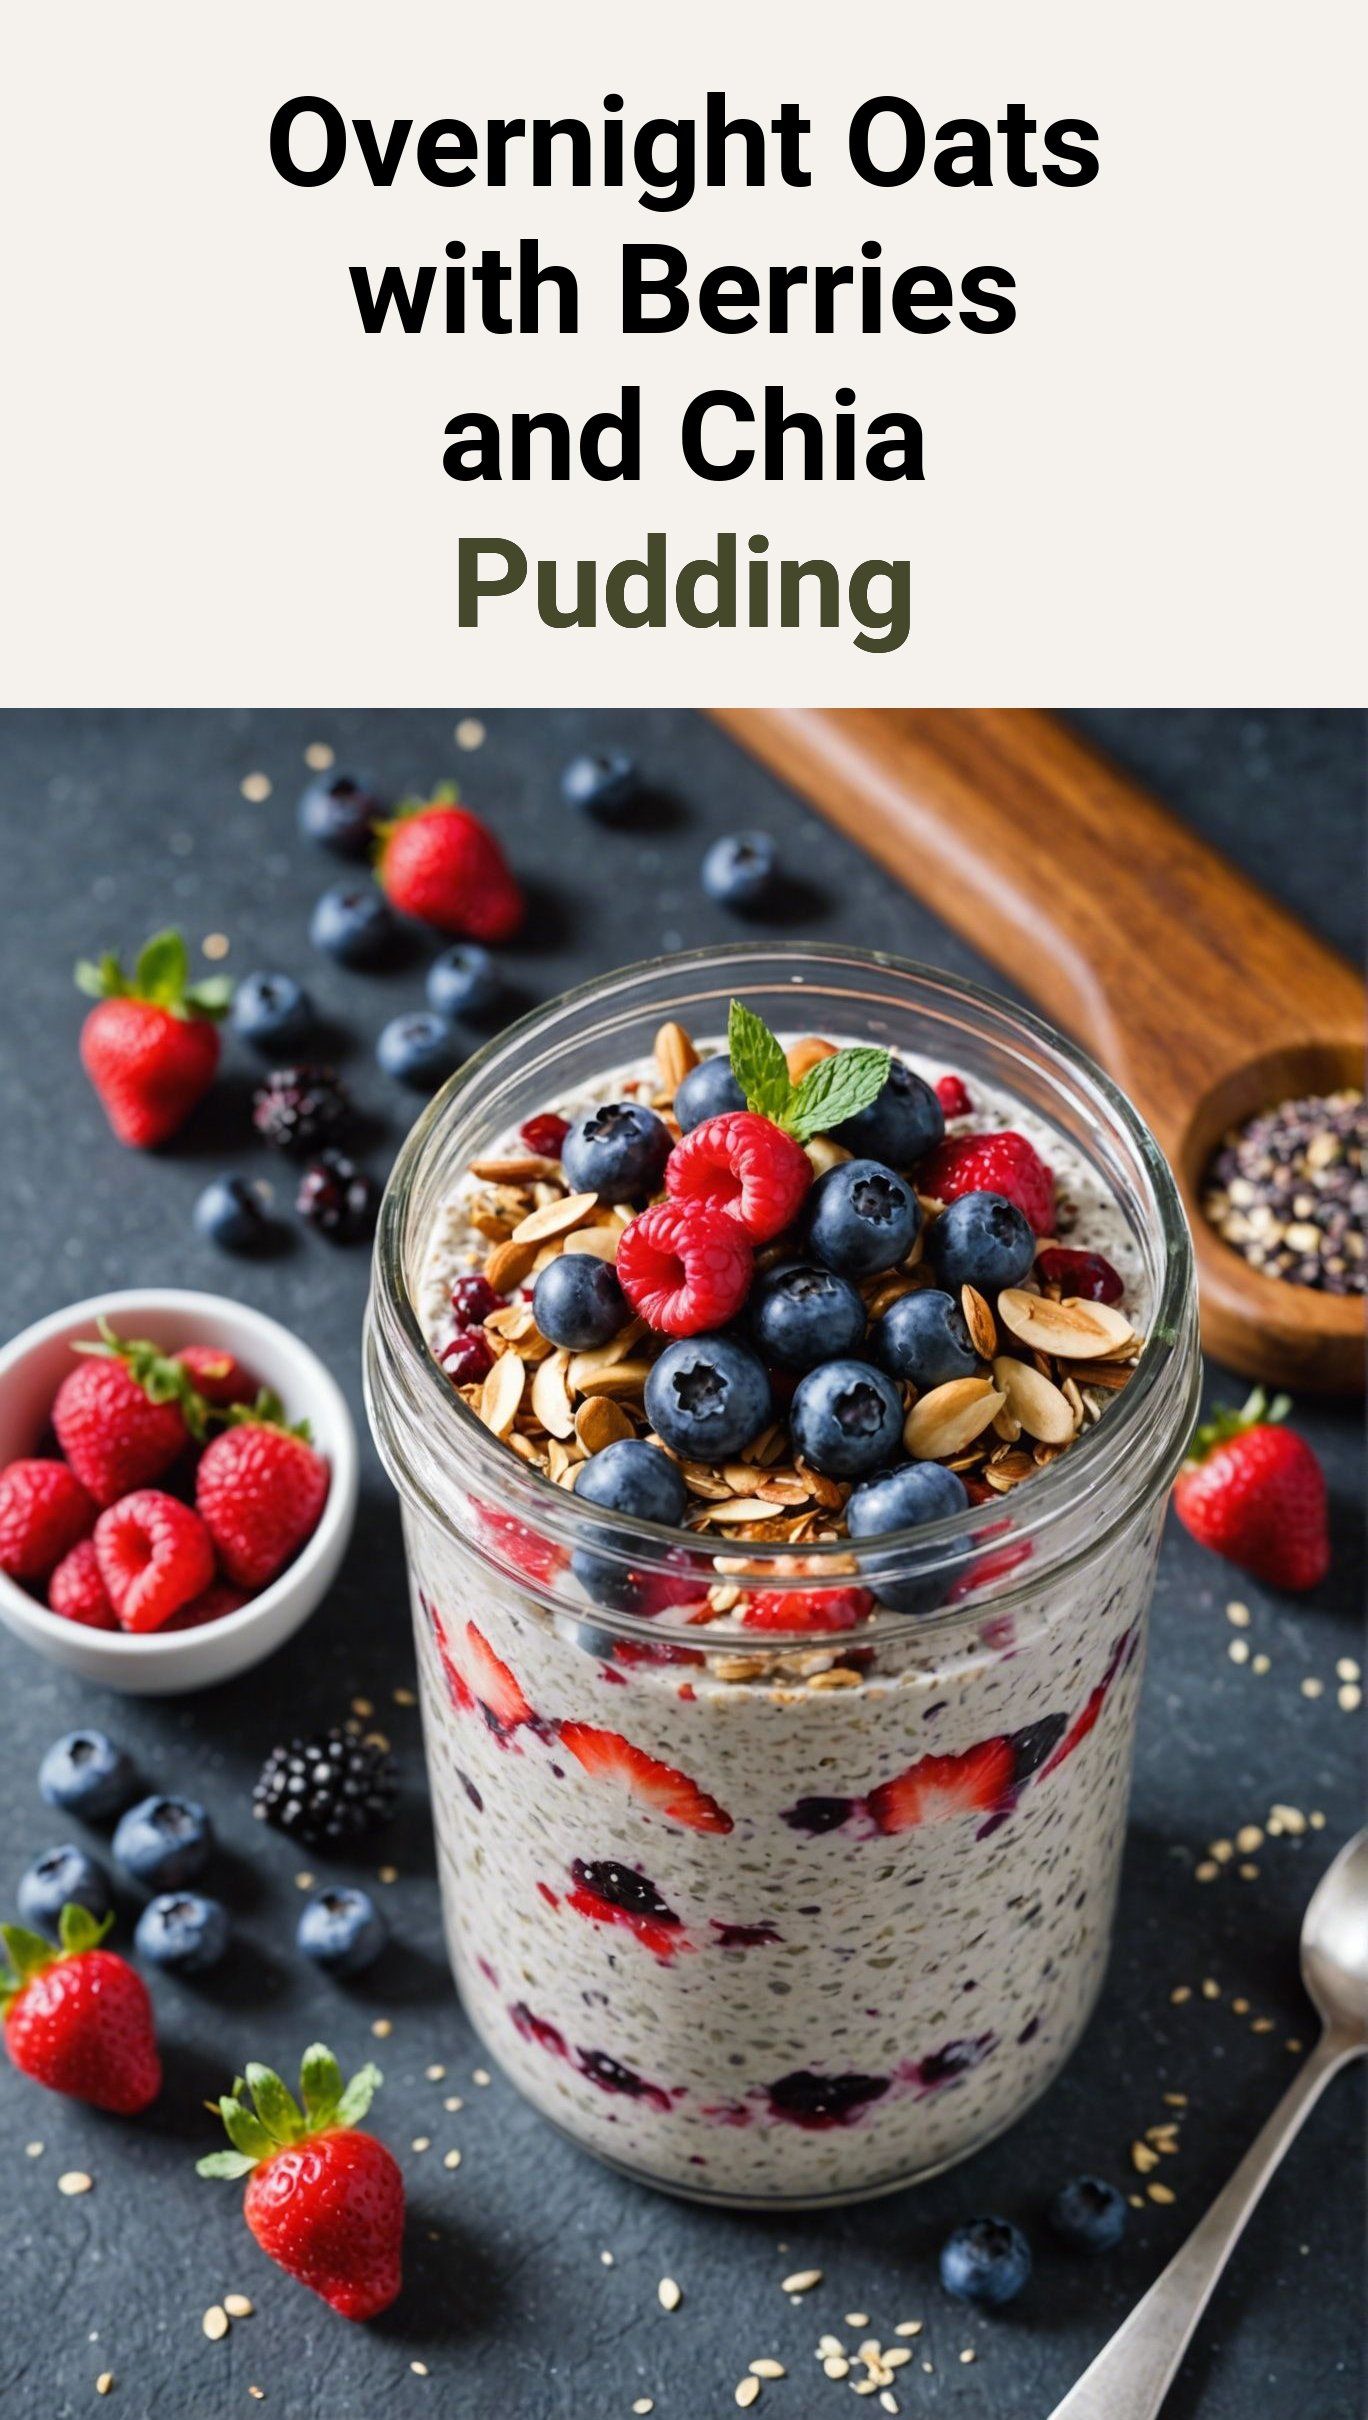 Overnight Oats with Berries and Chia Pudding